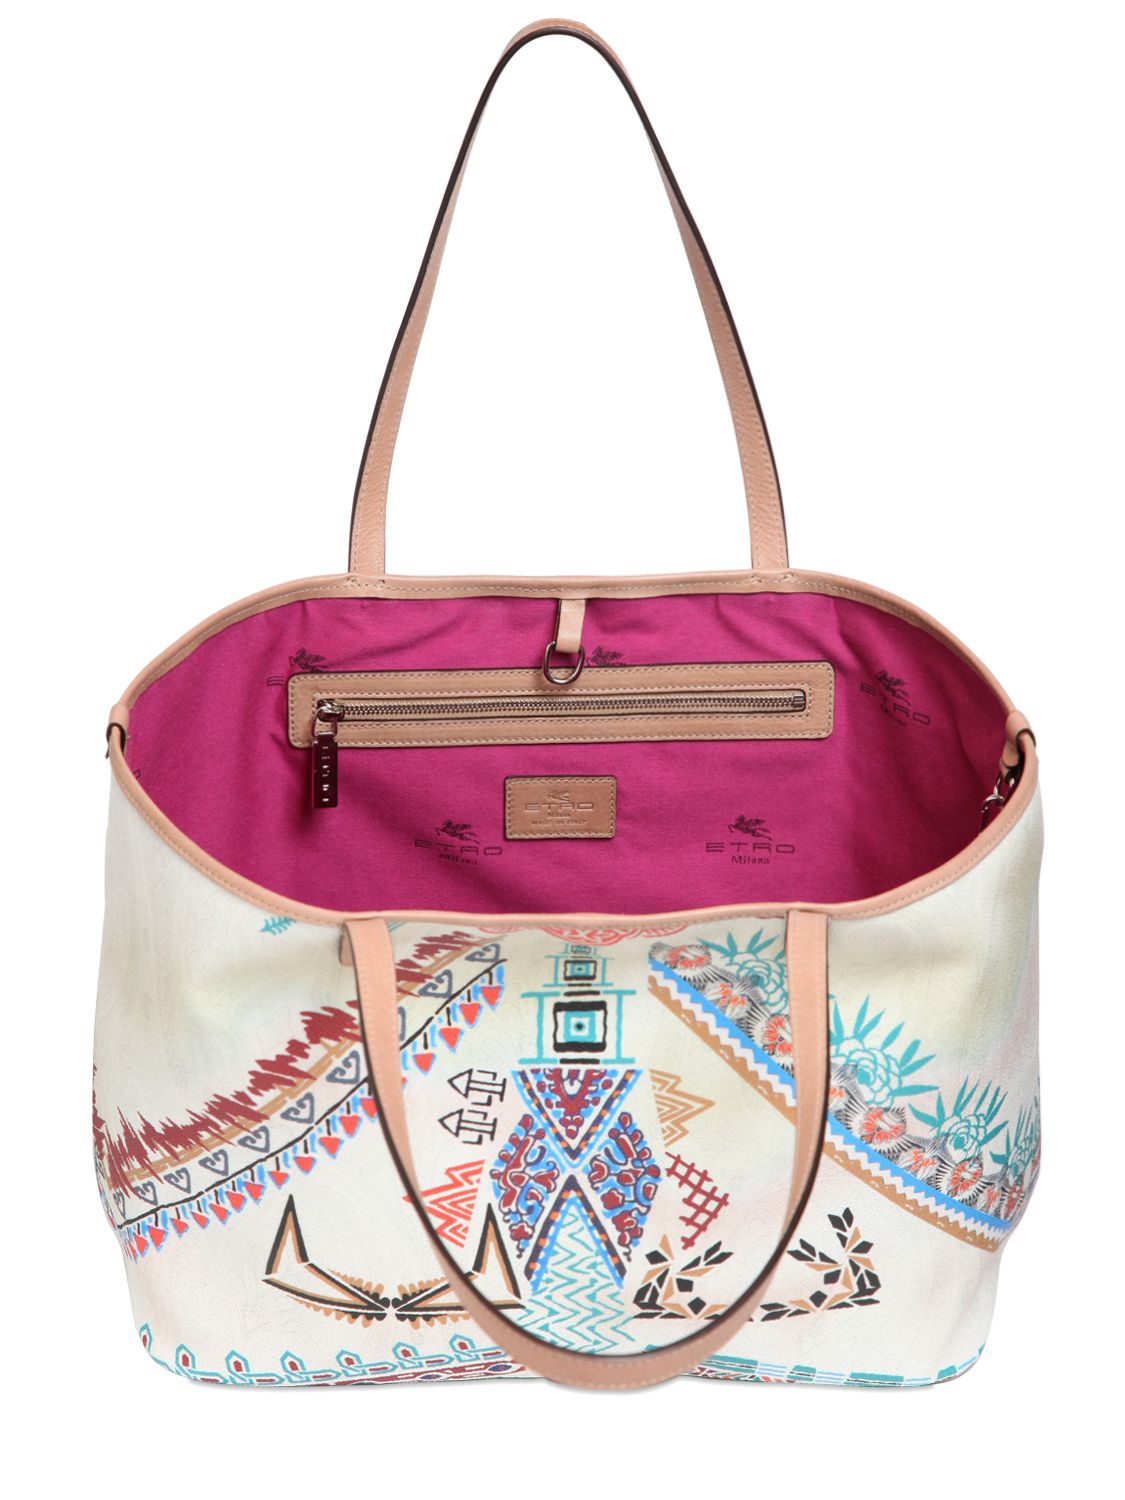 Etro Print Coated Canvas Tote Bag - Lyst